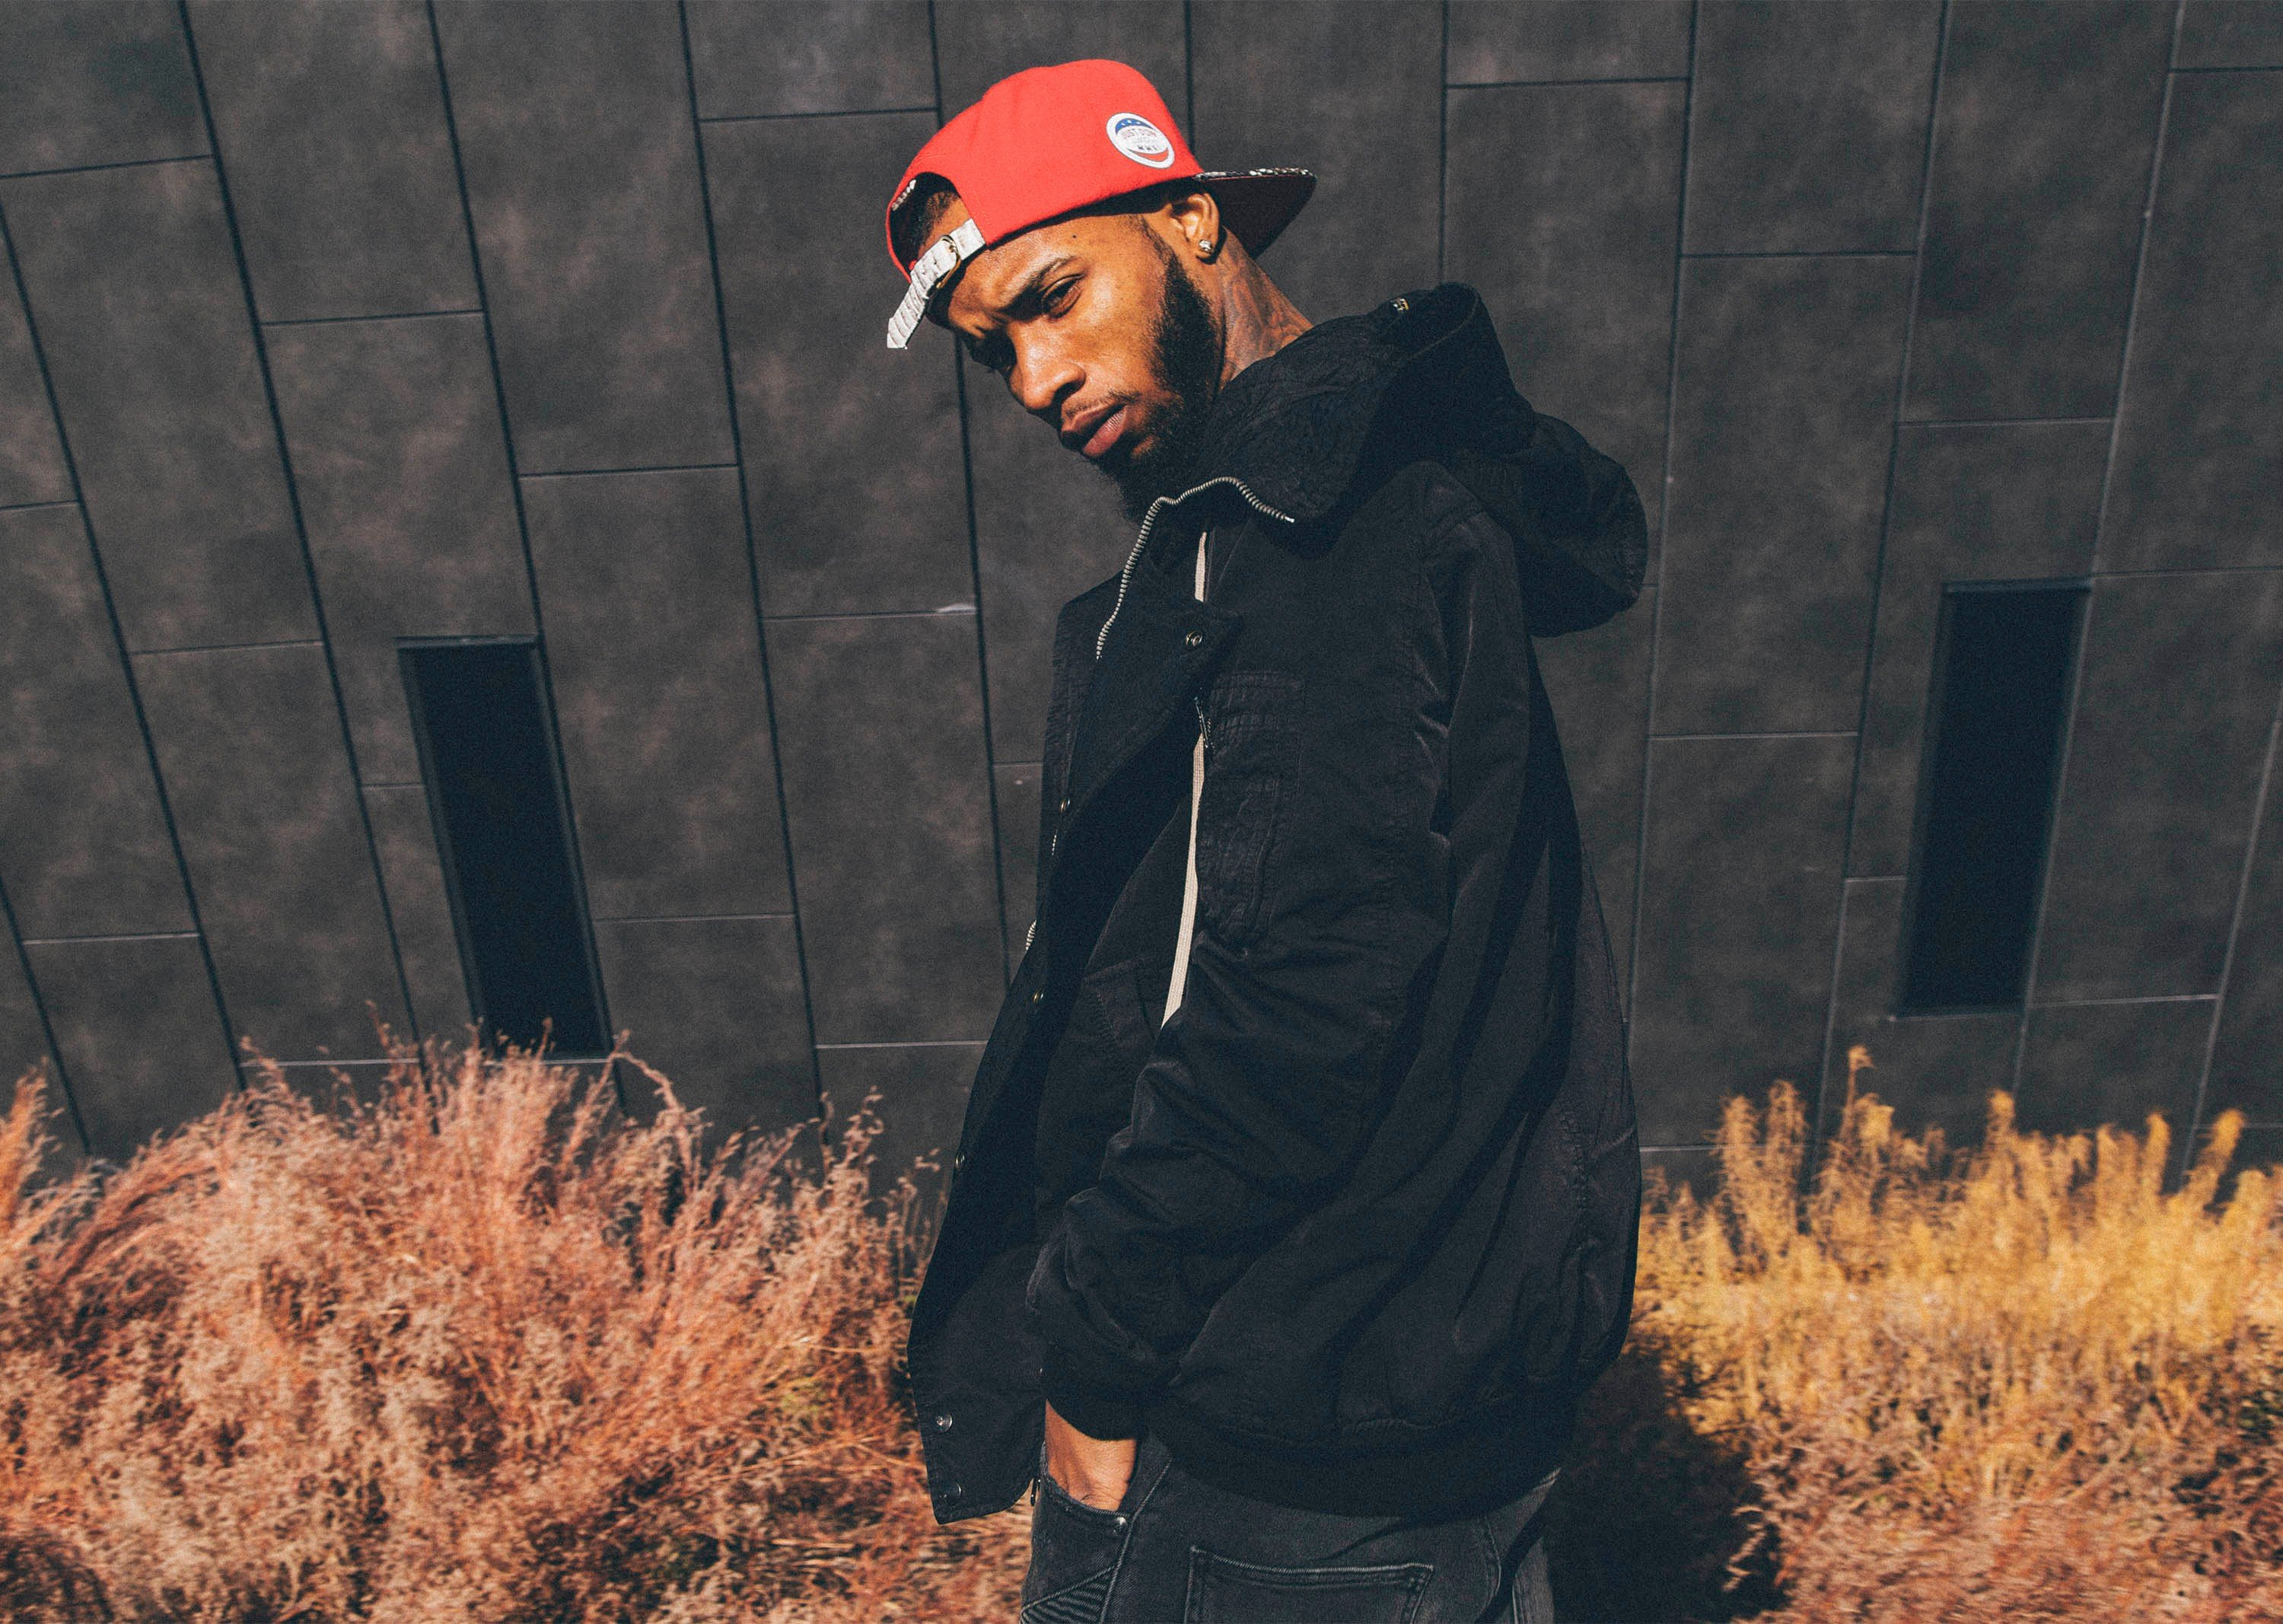 tory lanez luv download for free